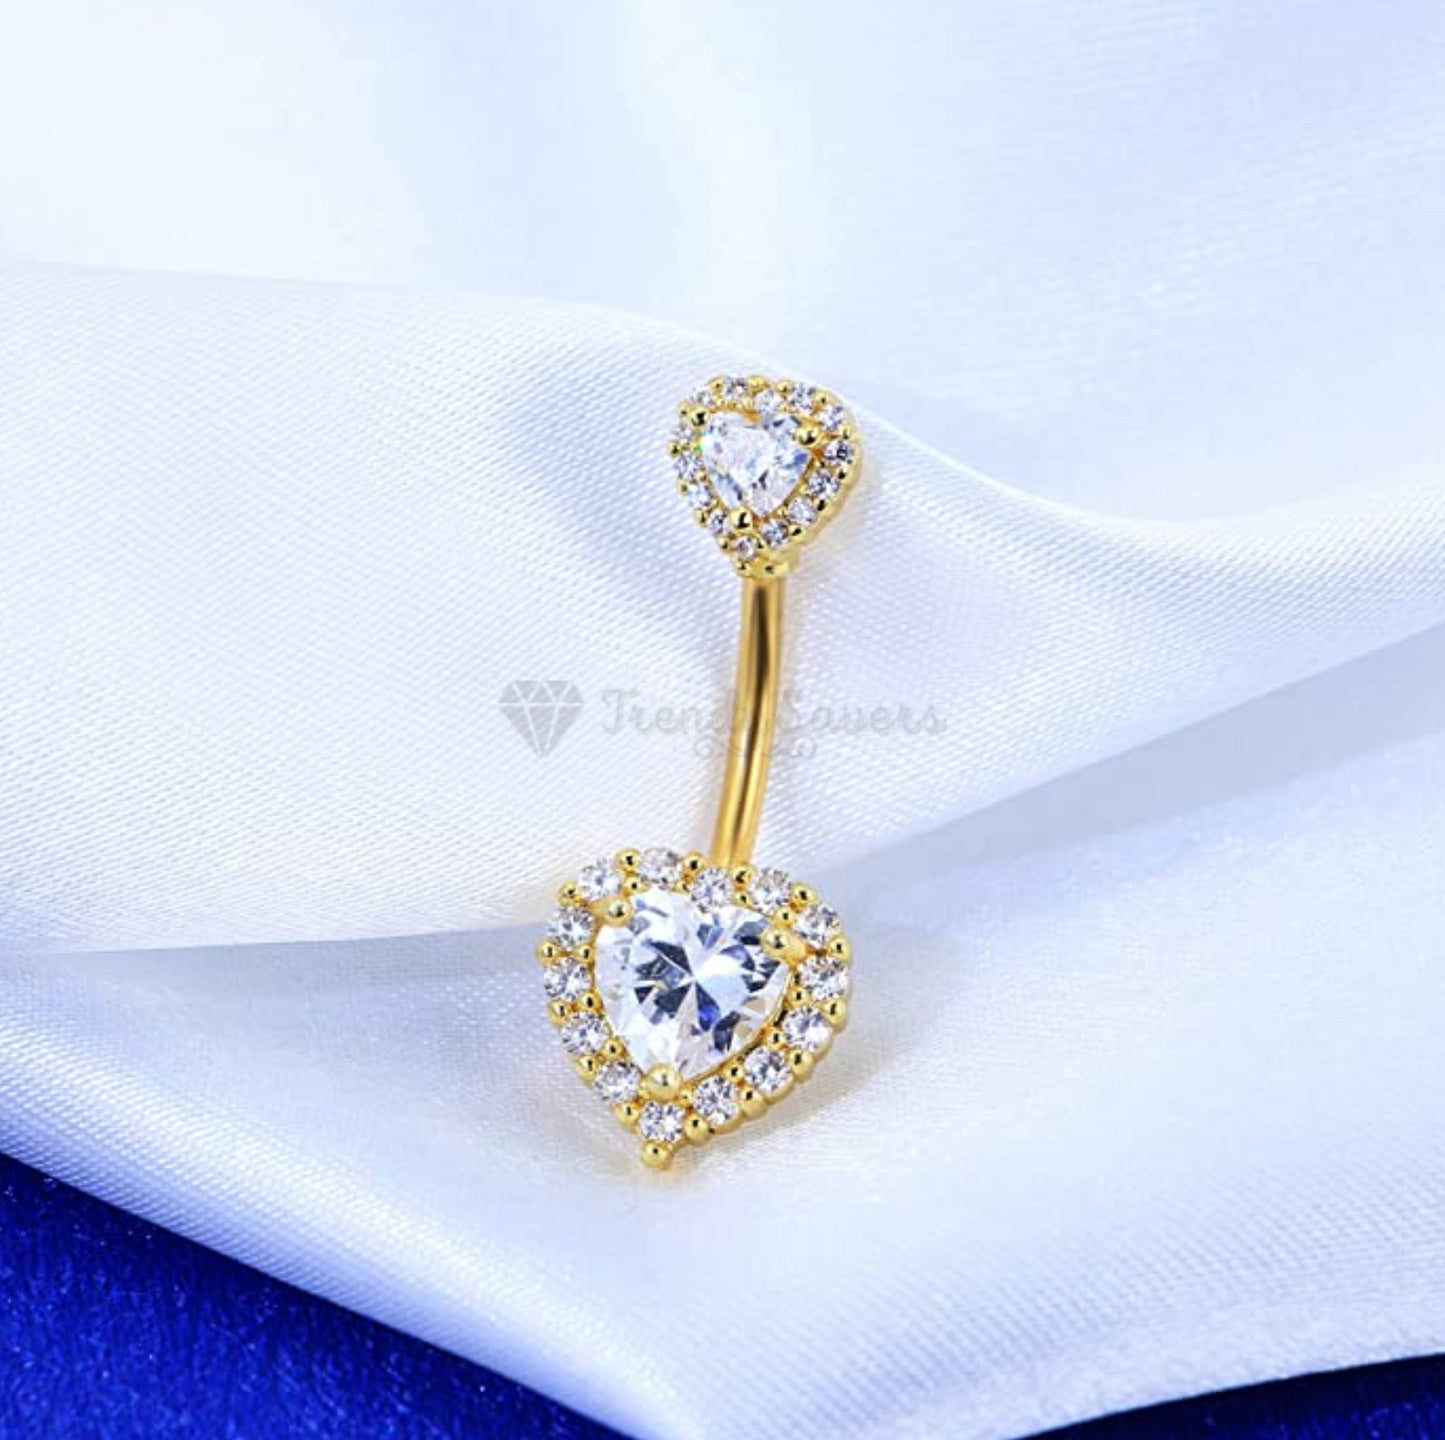 Hypoallergenic Gold Plated Two Heart Shaped Cubic Zircon Belly Button Stud Ring